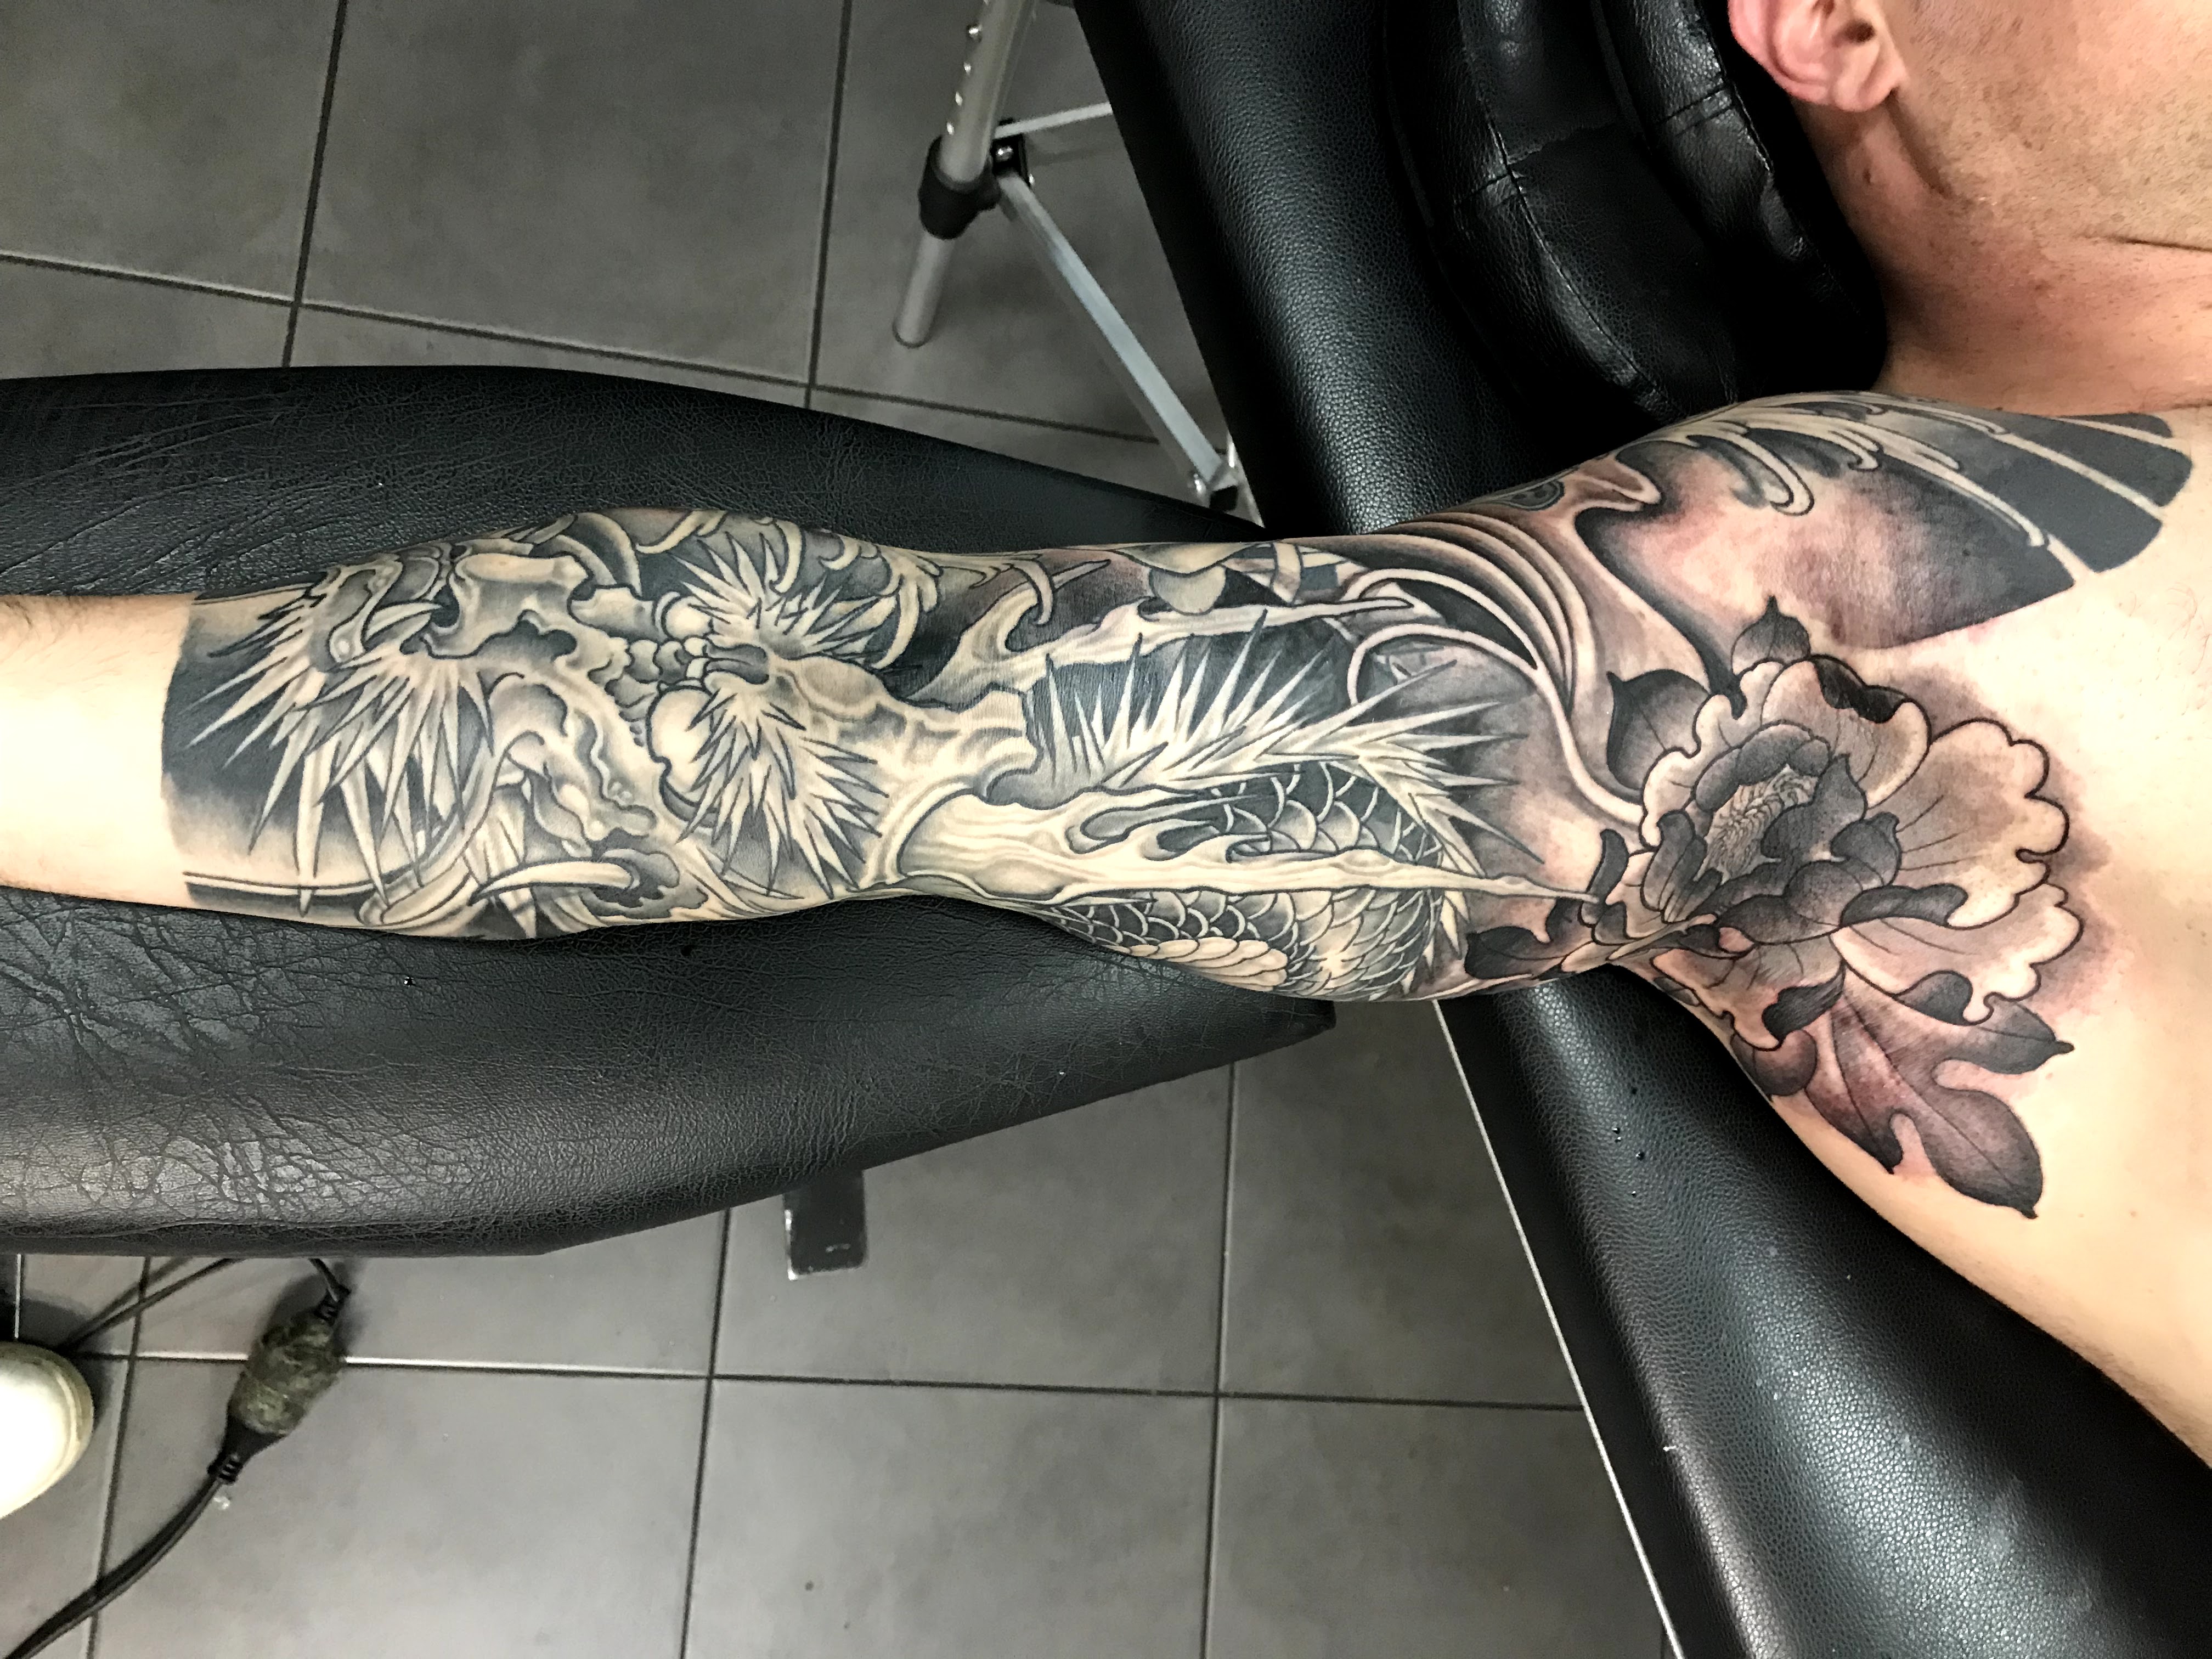 CB Ink Tattoo Brisbane - Artist: Geoff IN: @teague.tattoos Contact us for  all bookings and enquires Bookings and walk ins welcome. OPEN 7 DAYS  #cbinktattoo#werealwaysinyourcorner | Facebook